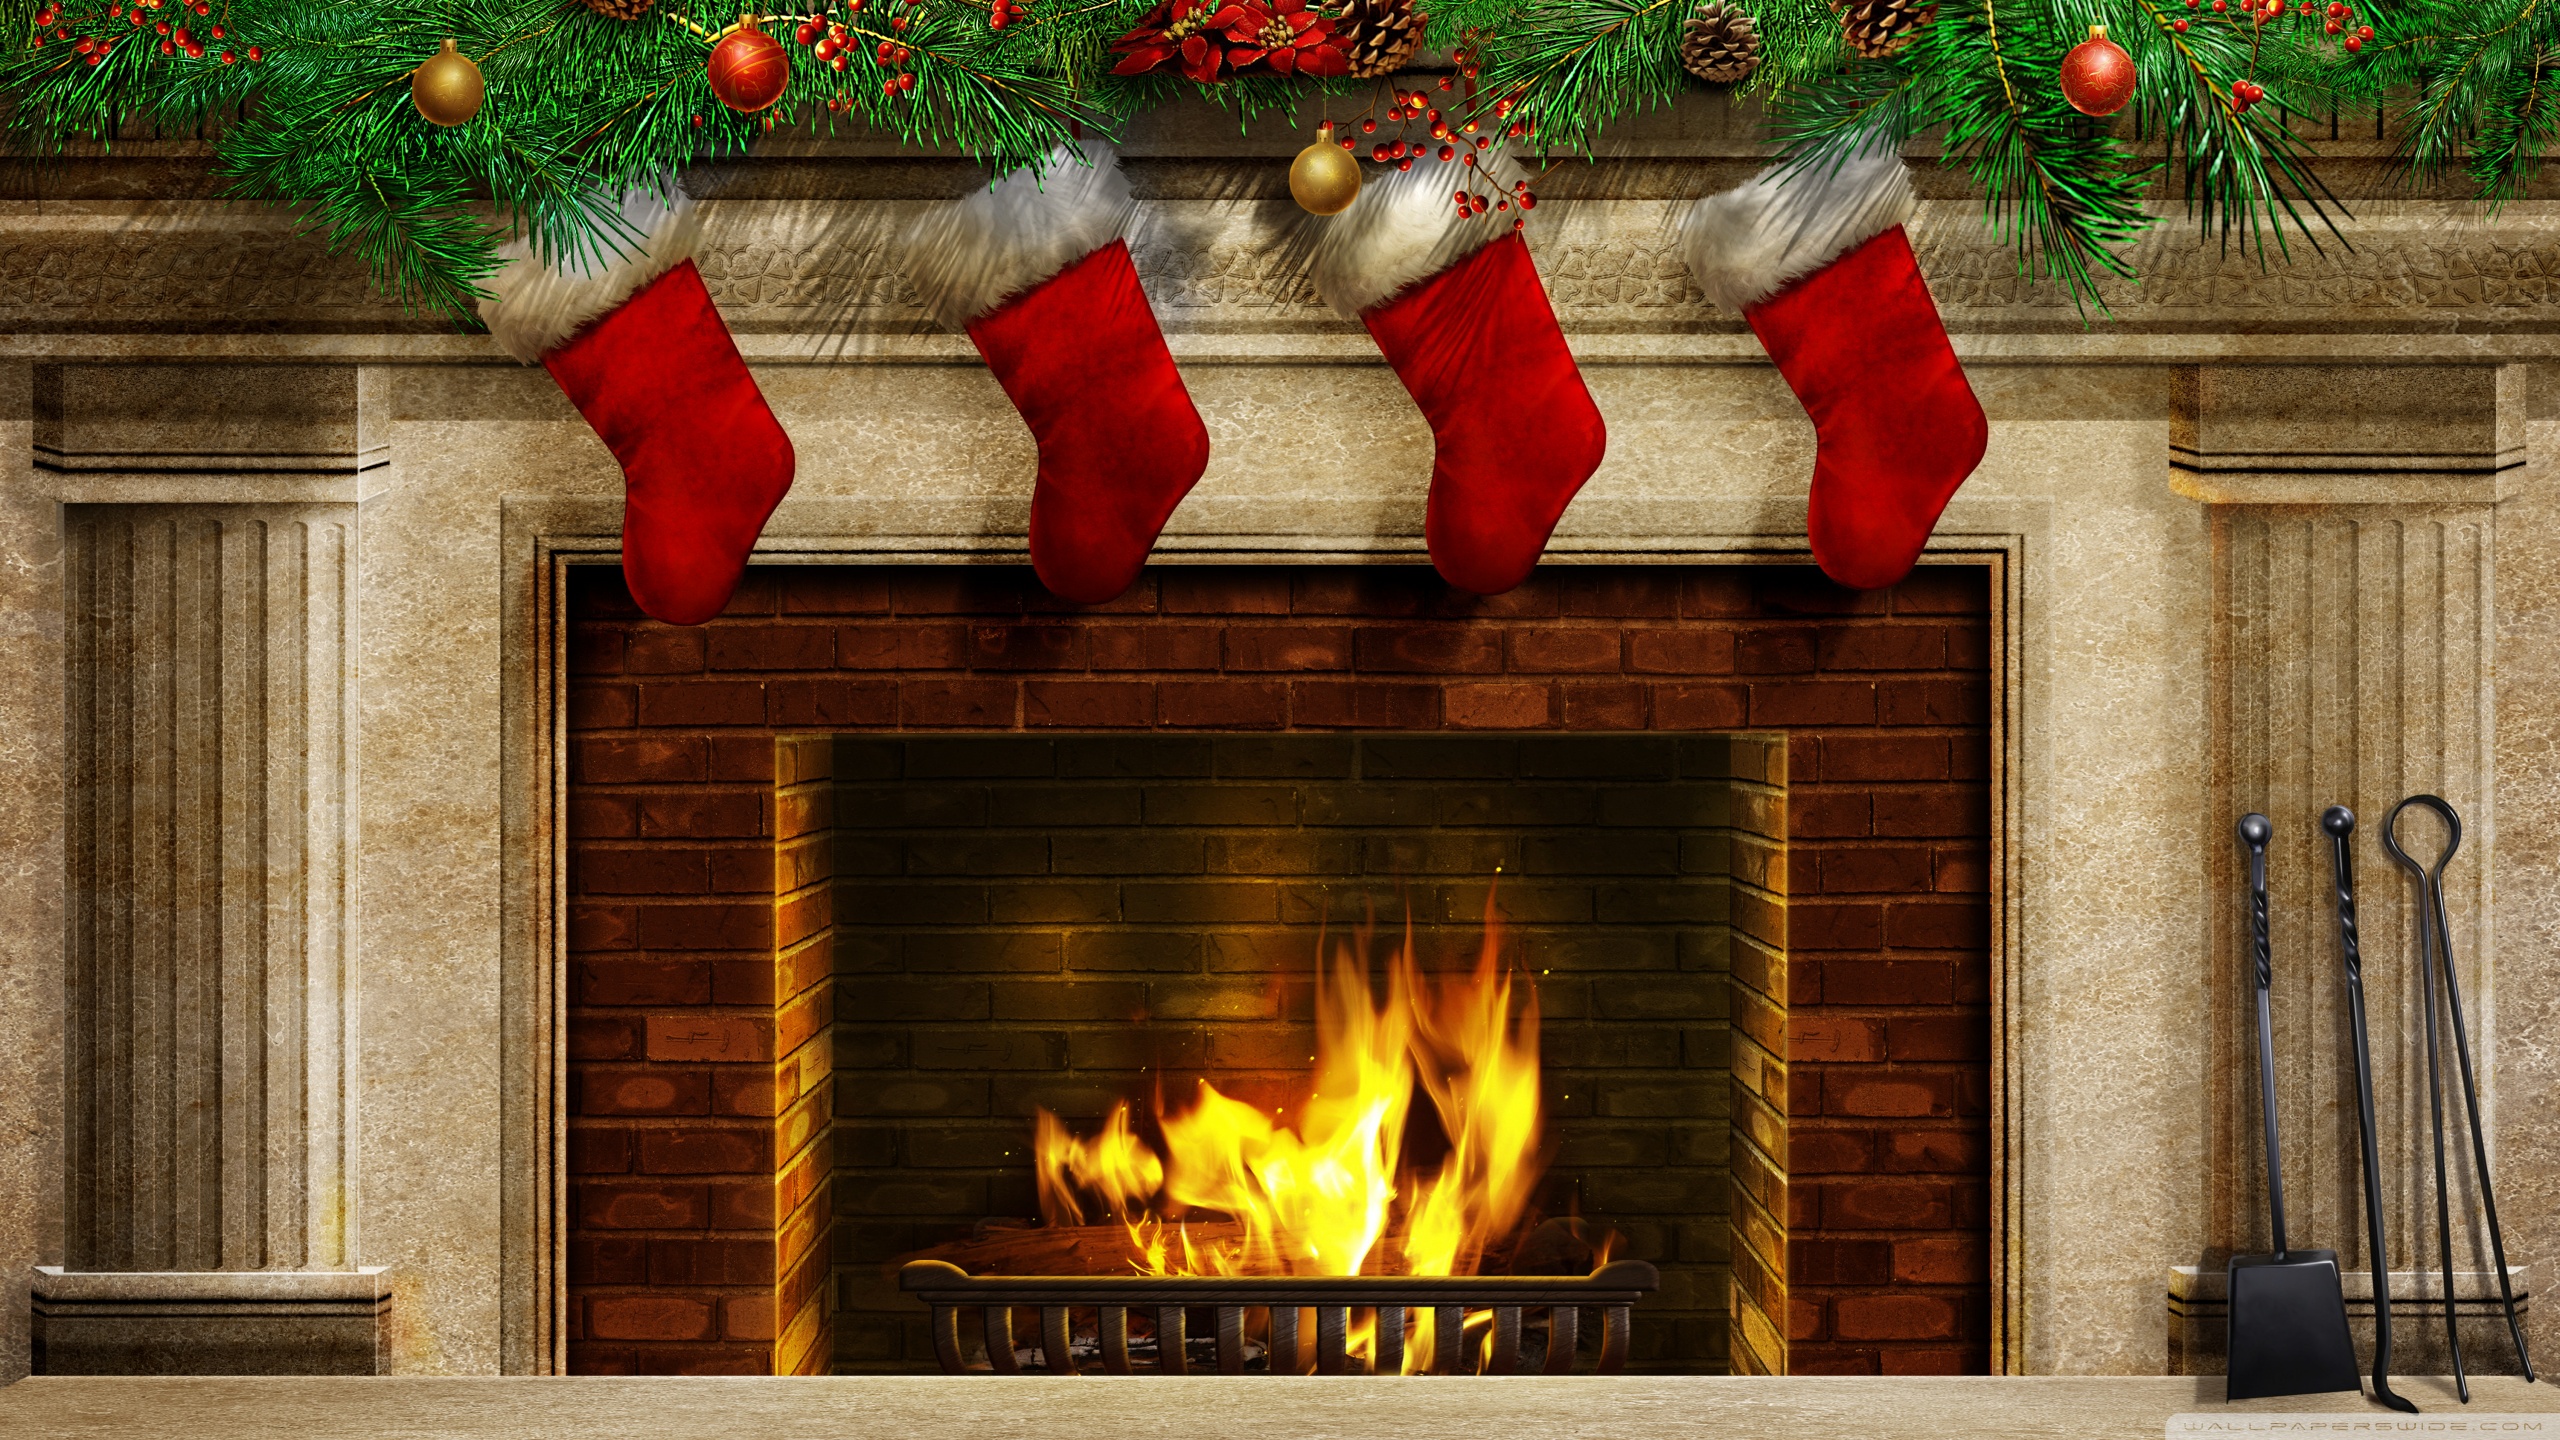 Hd 16 - - Christmas Stockings , HD Wallpaper & Backgrounds